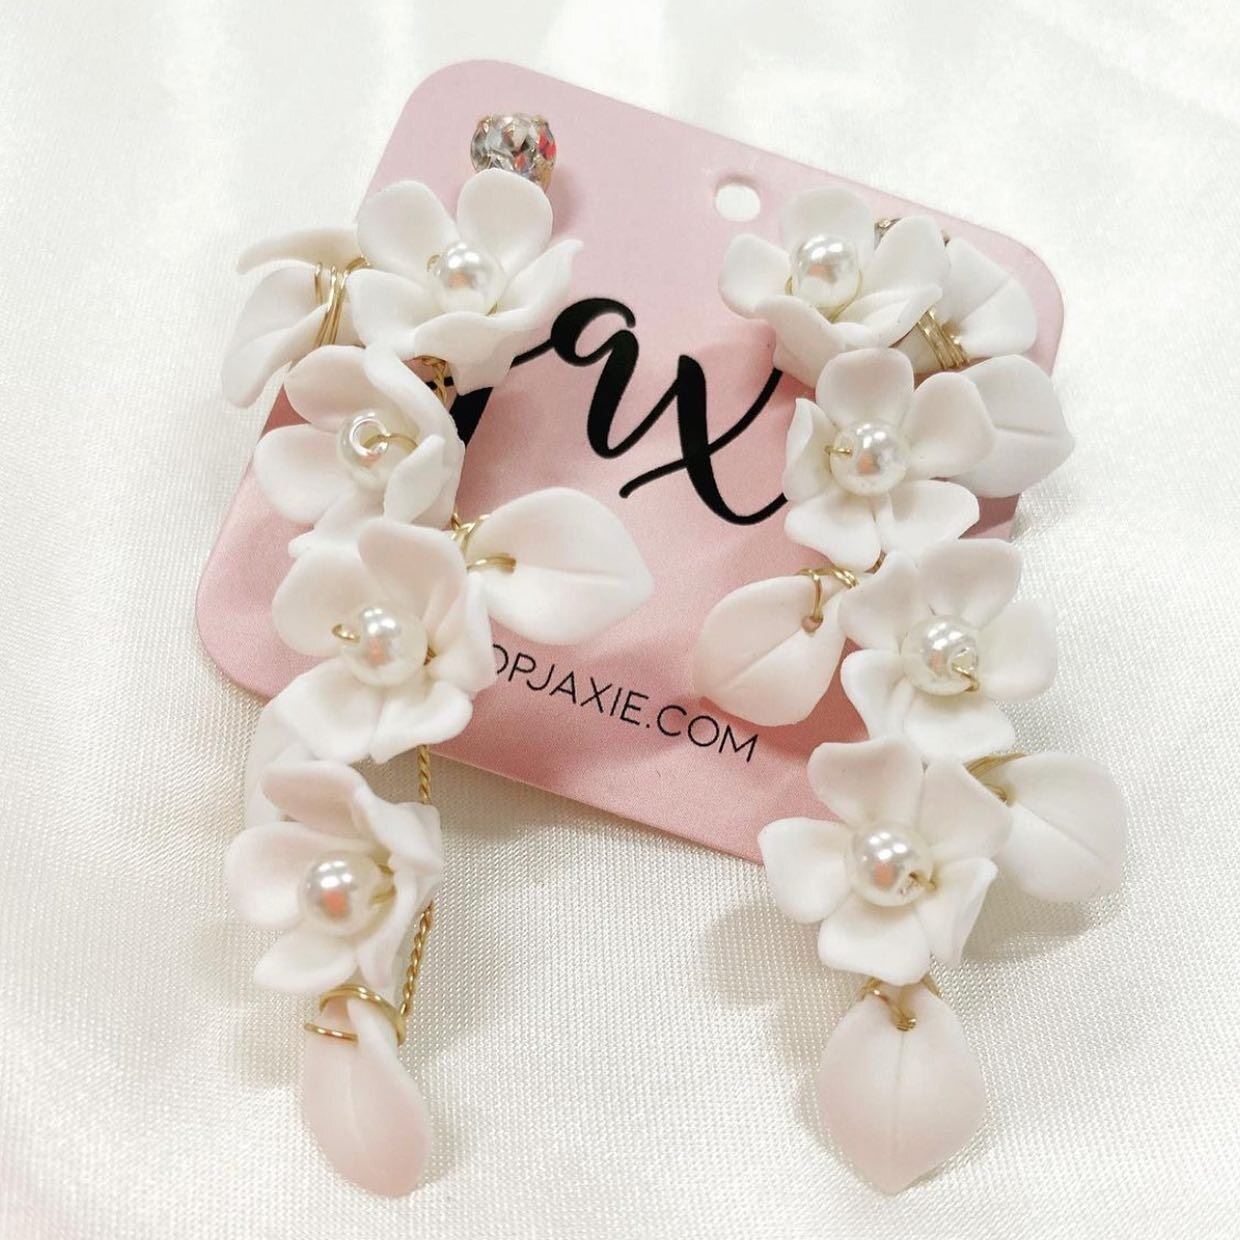 📣Announcement 📣 

💗ACCESSORIES TRUNK SHOW💗

Our JAXIE accessories TRUNK SHOW is kicking off July 6th! 
We&rsquo;ll have a variety of @jaxiebridal styles for you to try 7/6 - 7/16. 

Hurry over to our stories to see how you can weigh in on what we